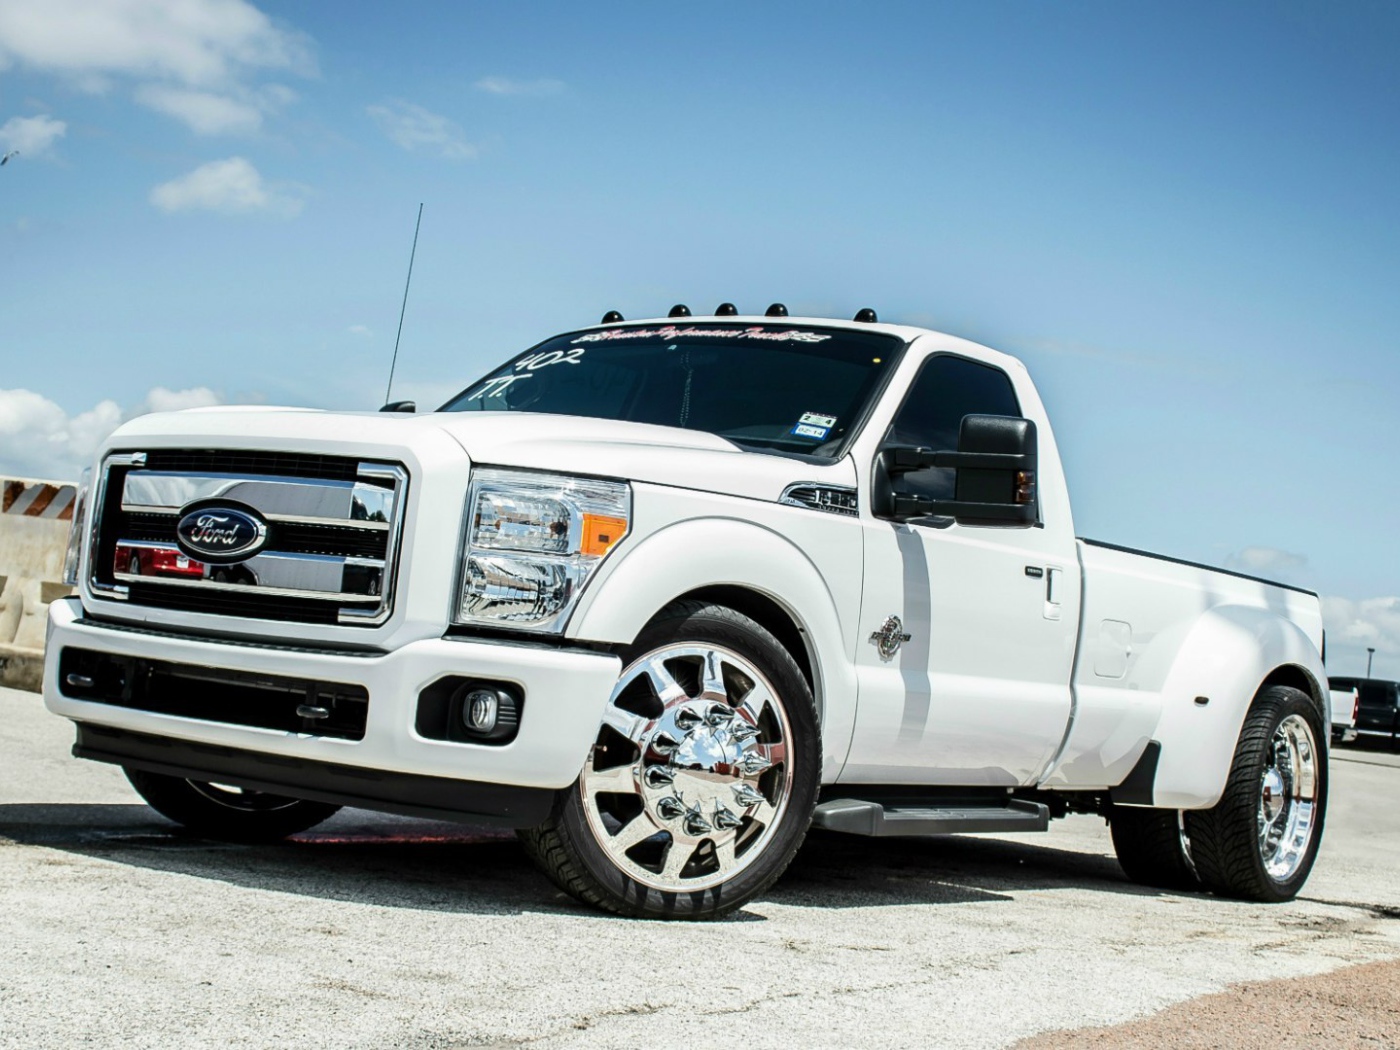 Powerful pickup Ford F-350